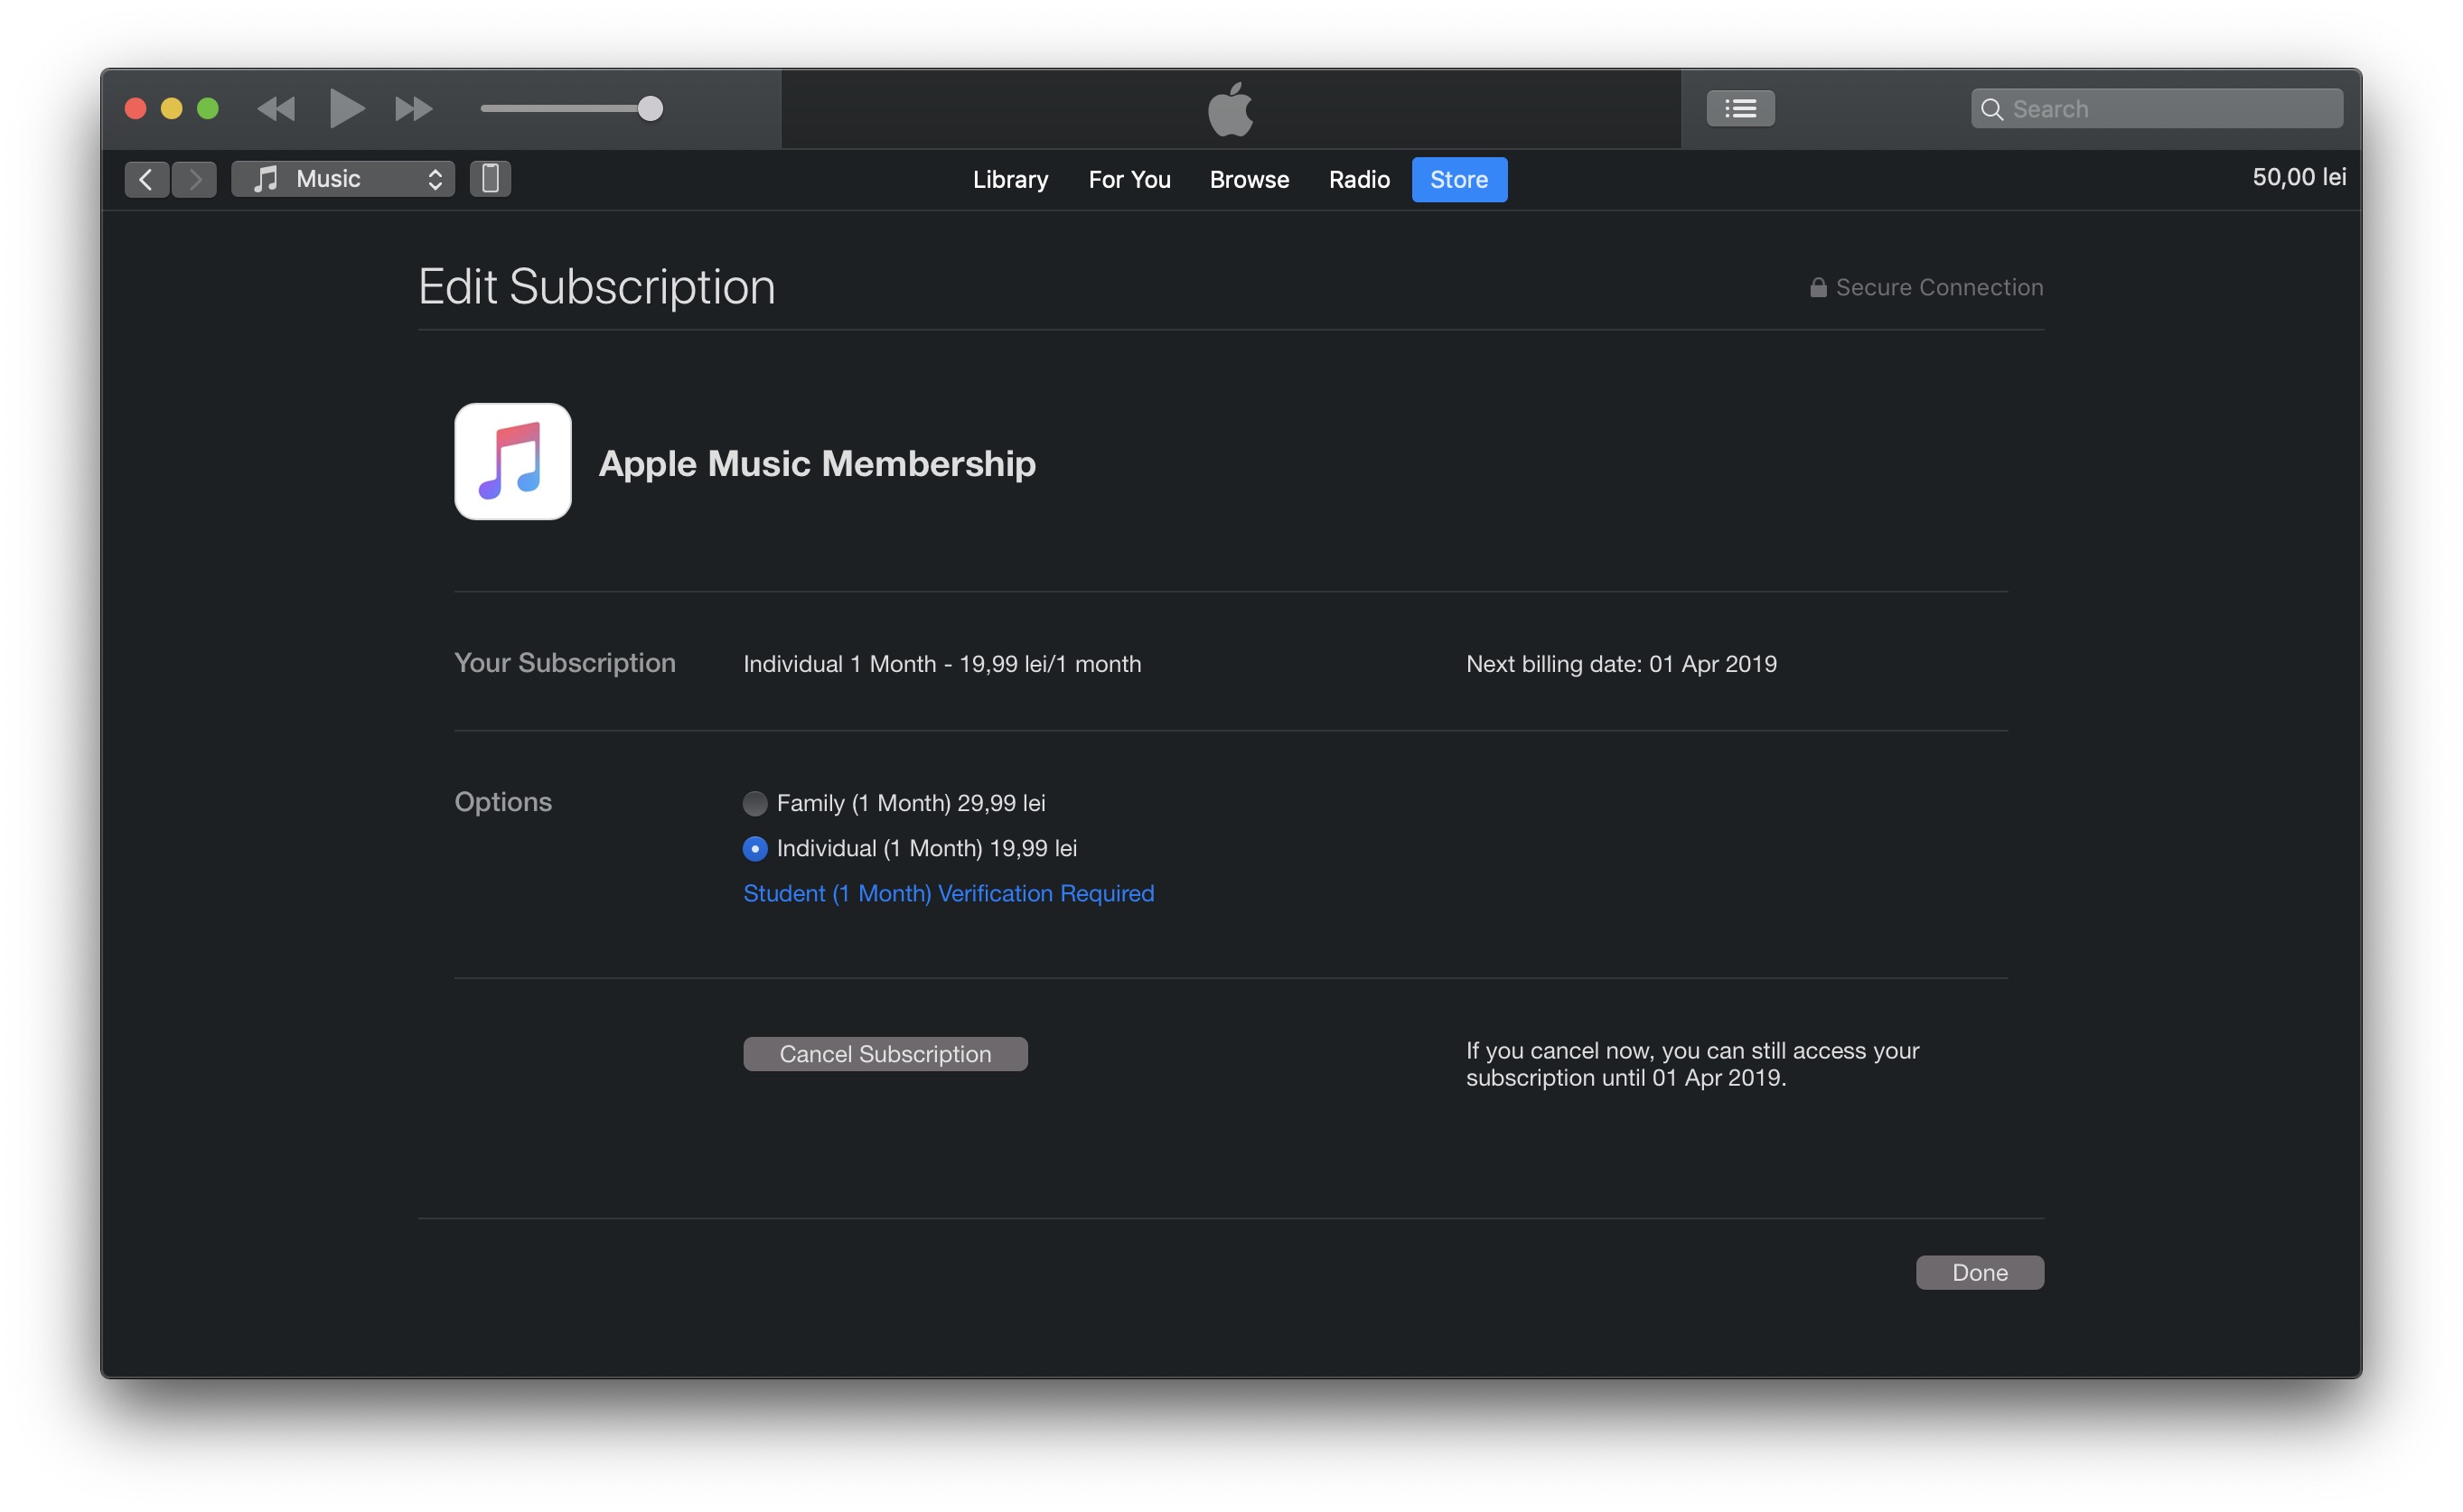 How can we close the subscription Apple Music (Cancel Apple Music subscription)